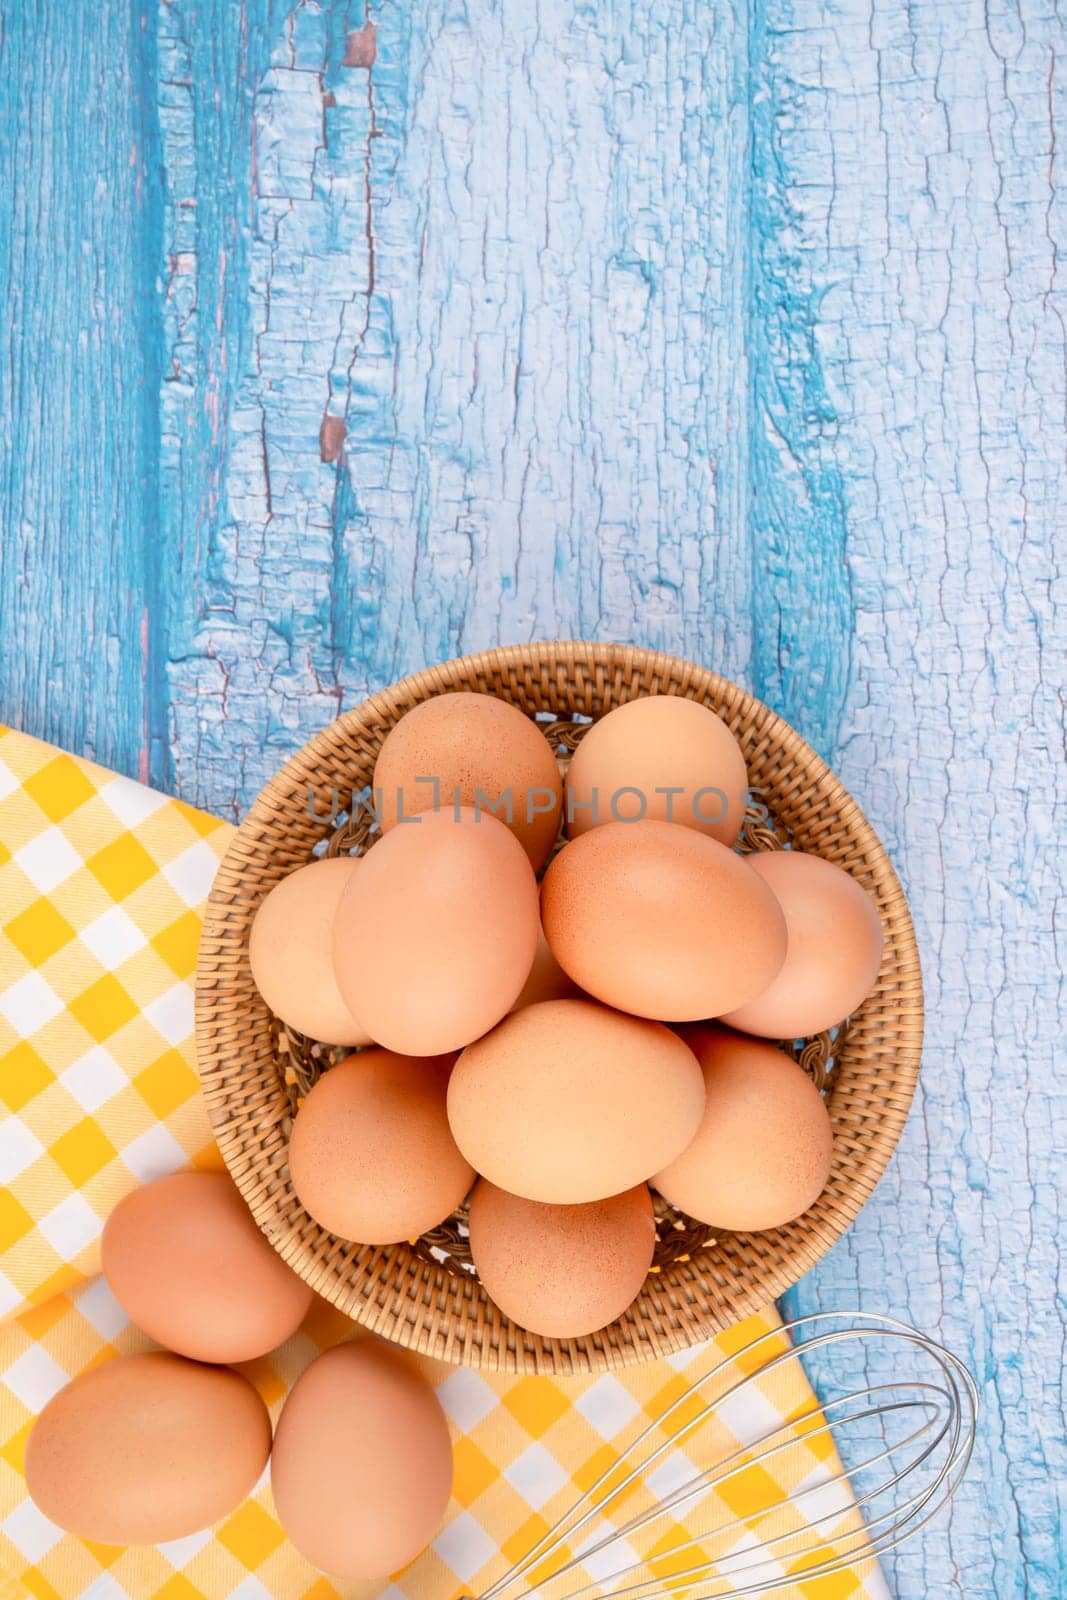 The Overhead view of brown chicken eggs in weave basket and a whisk on blue wooden background. by Gamjai